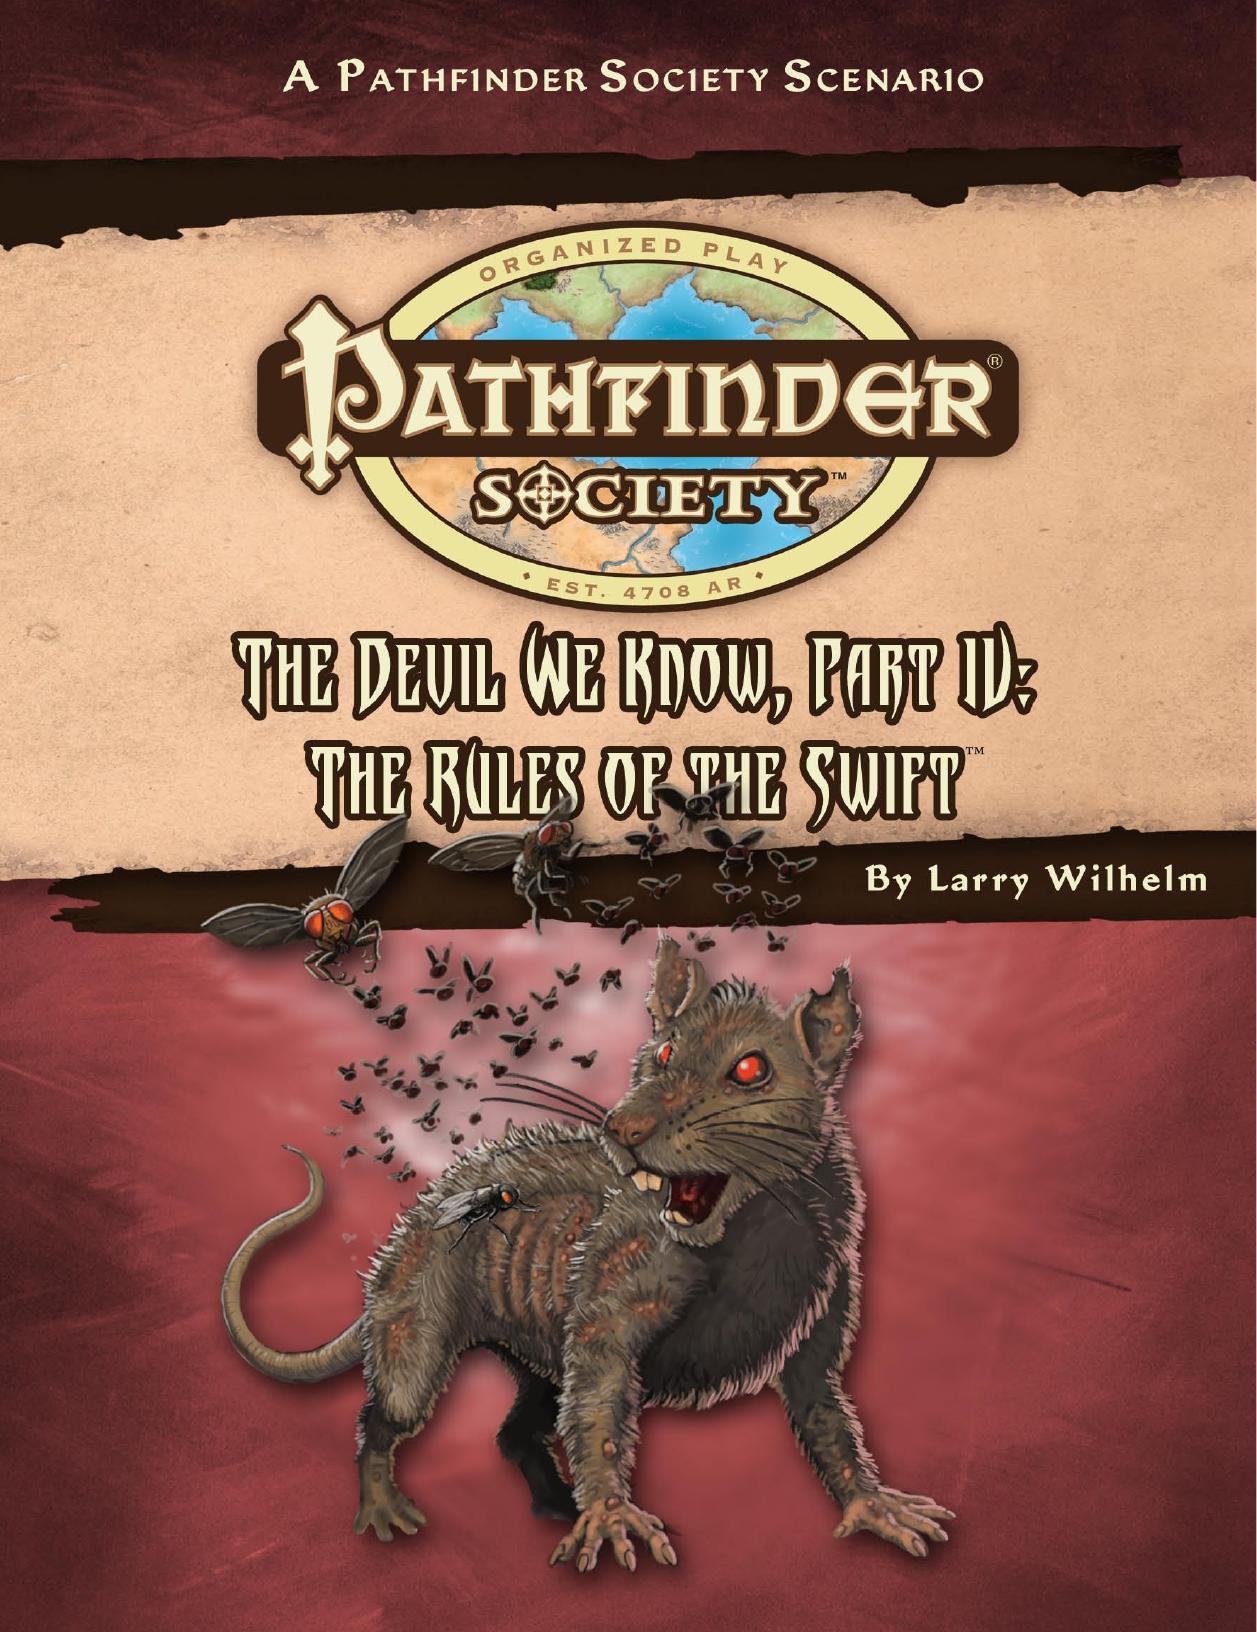 Pathfinder Society: The Devil We Know IV: Ther Rules of the Swift